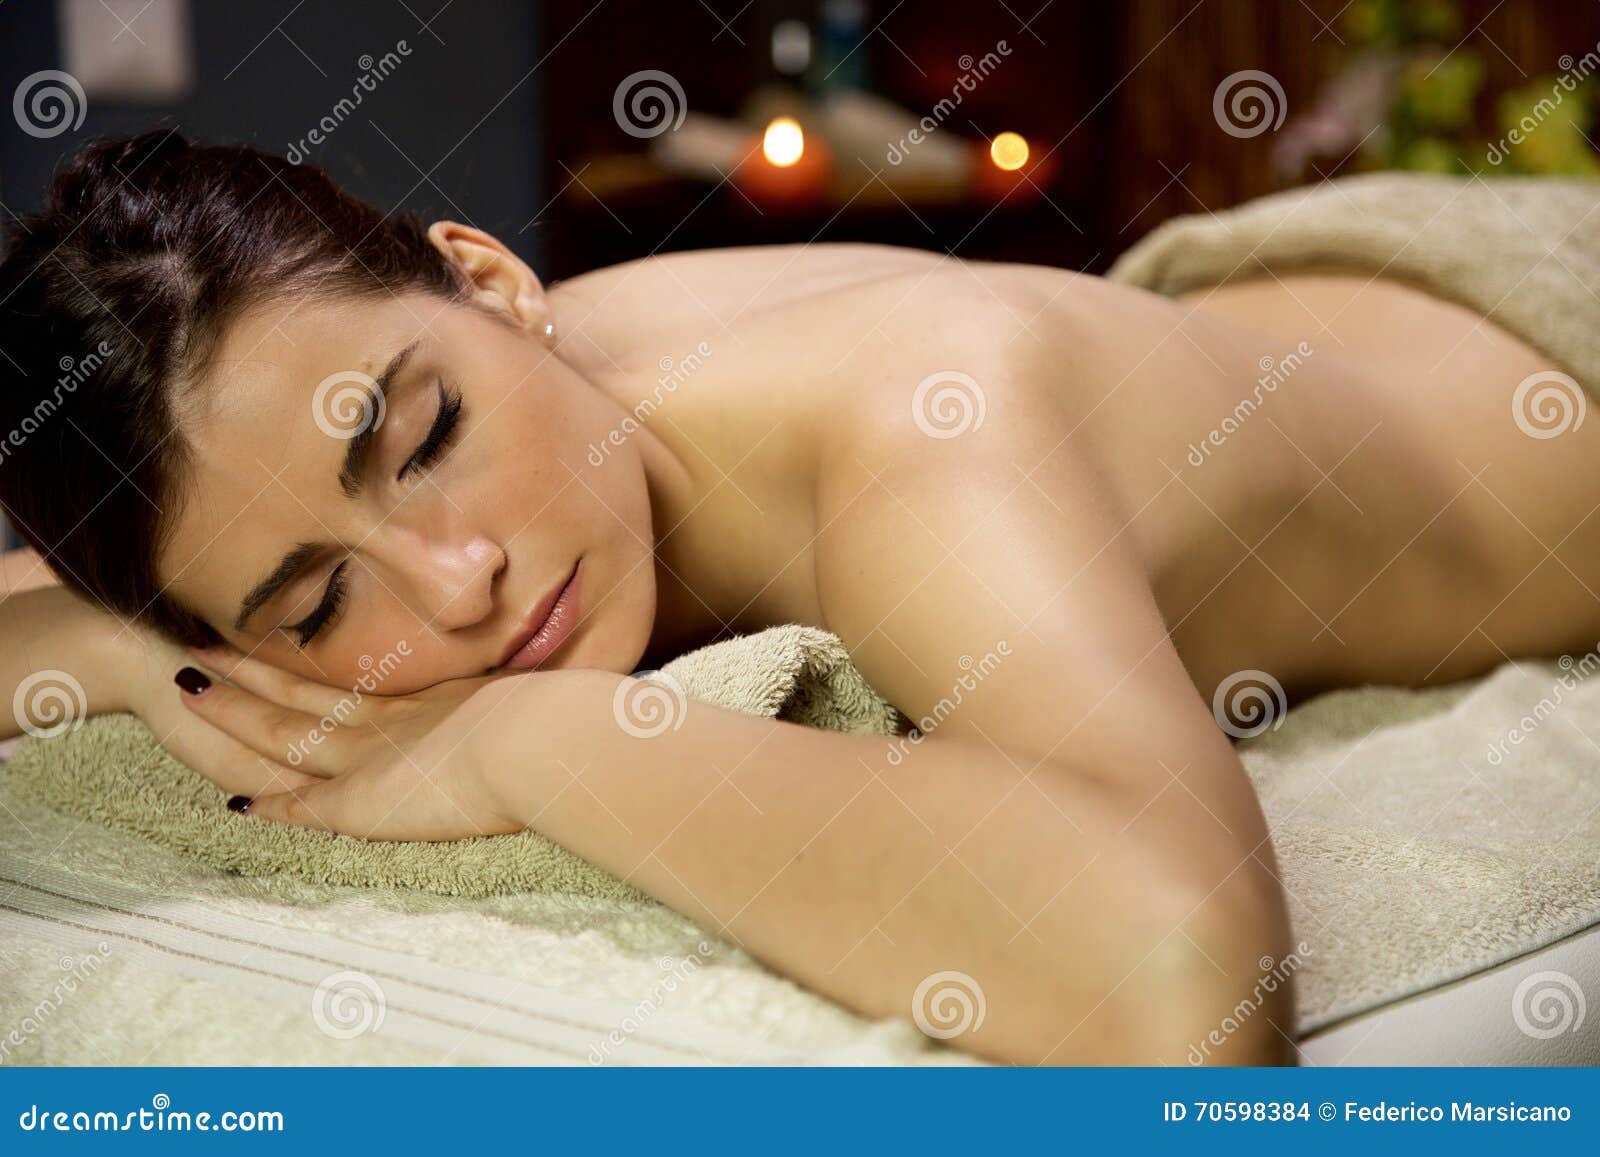 Beautiful Woman Relaxing Spa Waiting Massage Vacation Stock Photos picture pic